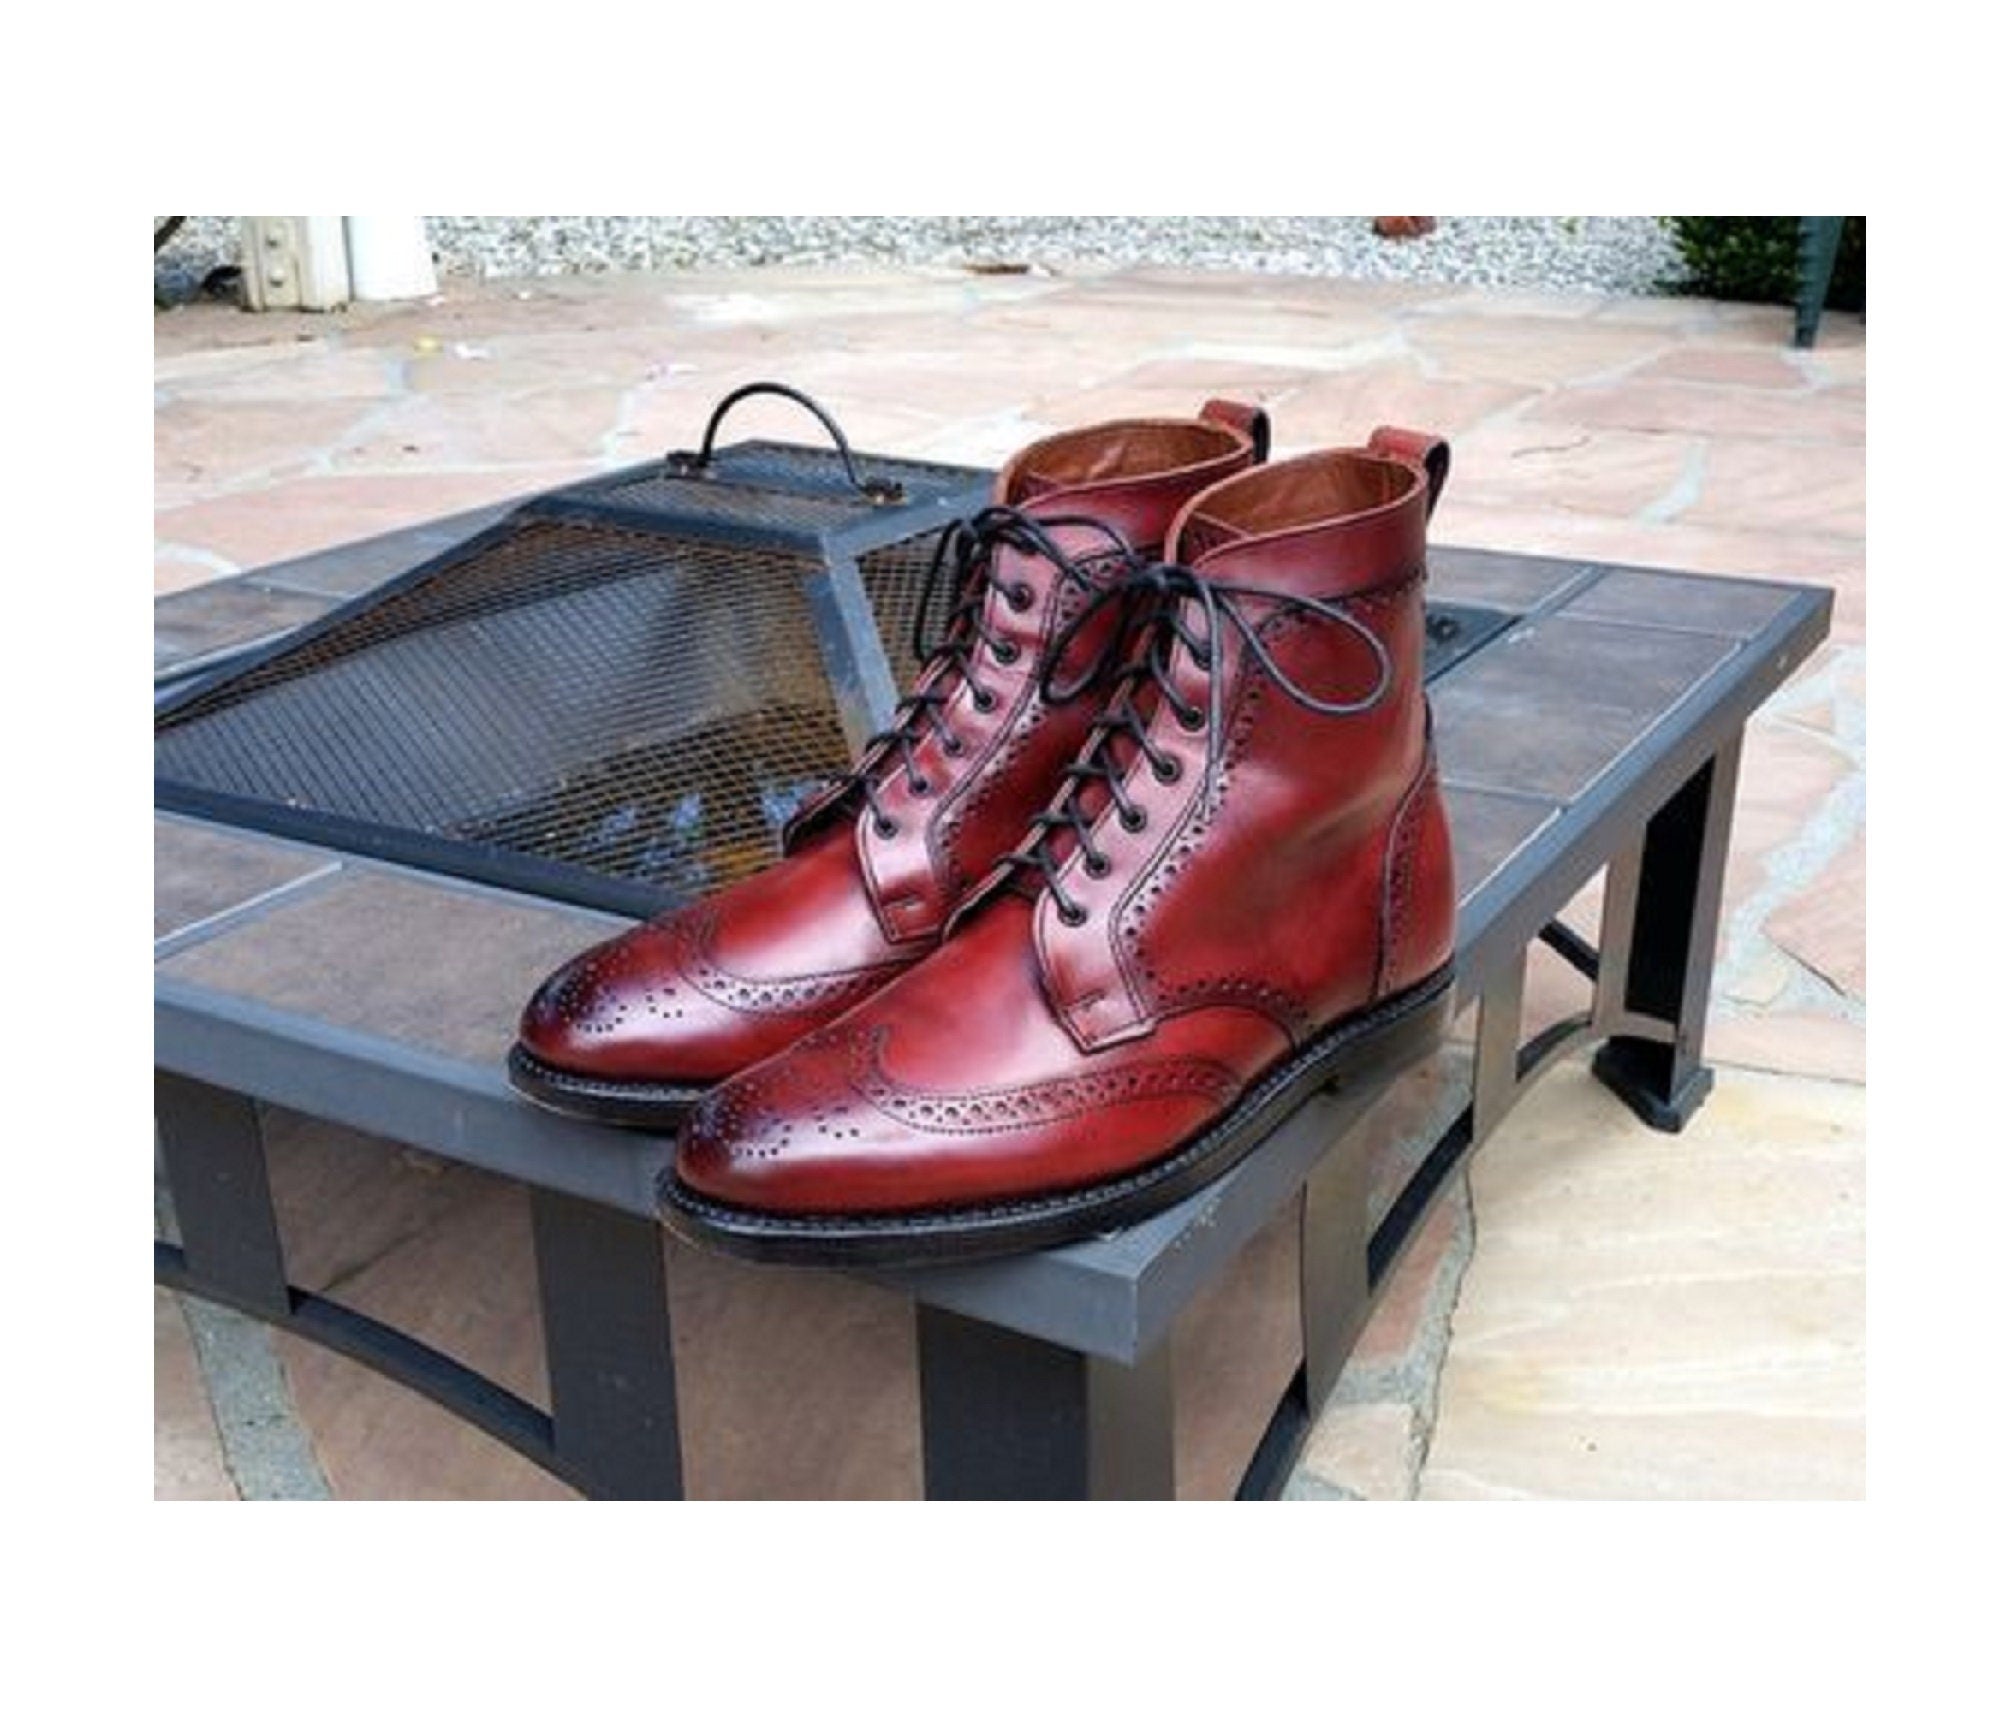 Handmade Burgundy Wing Tip Brogue Leather Boot, Dress Formal Boots For Men, Genuine Leather Lace up Boots